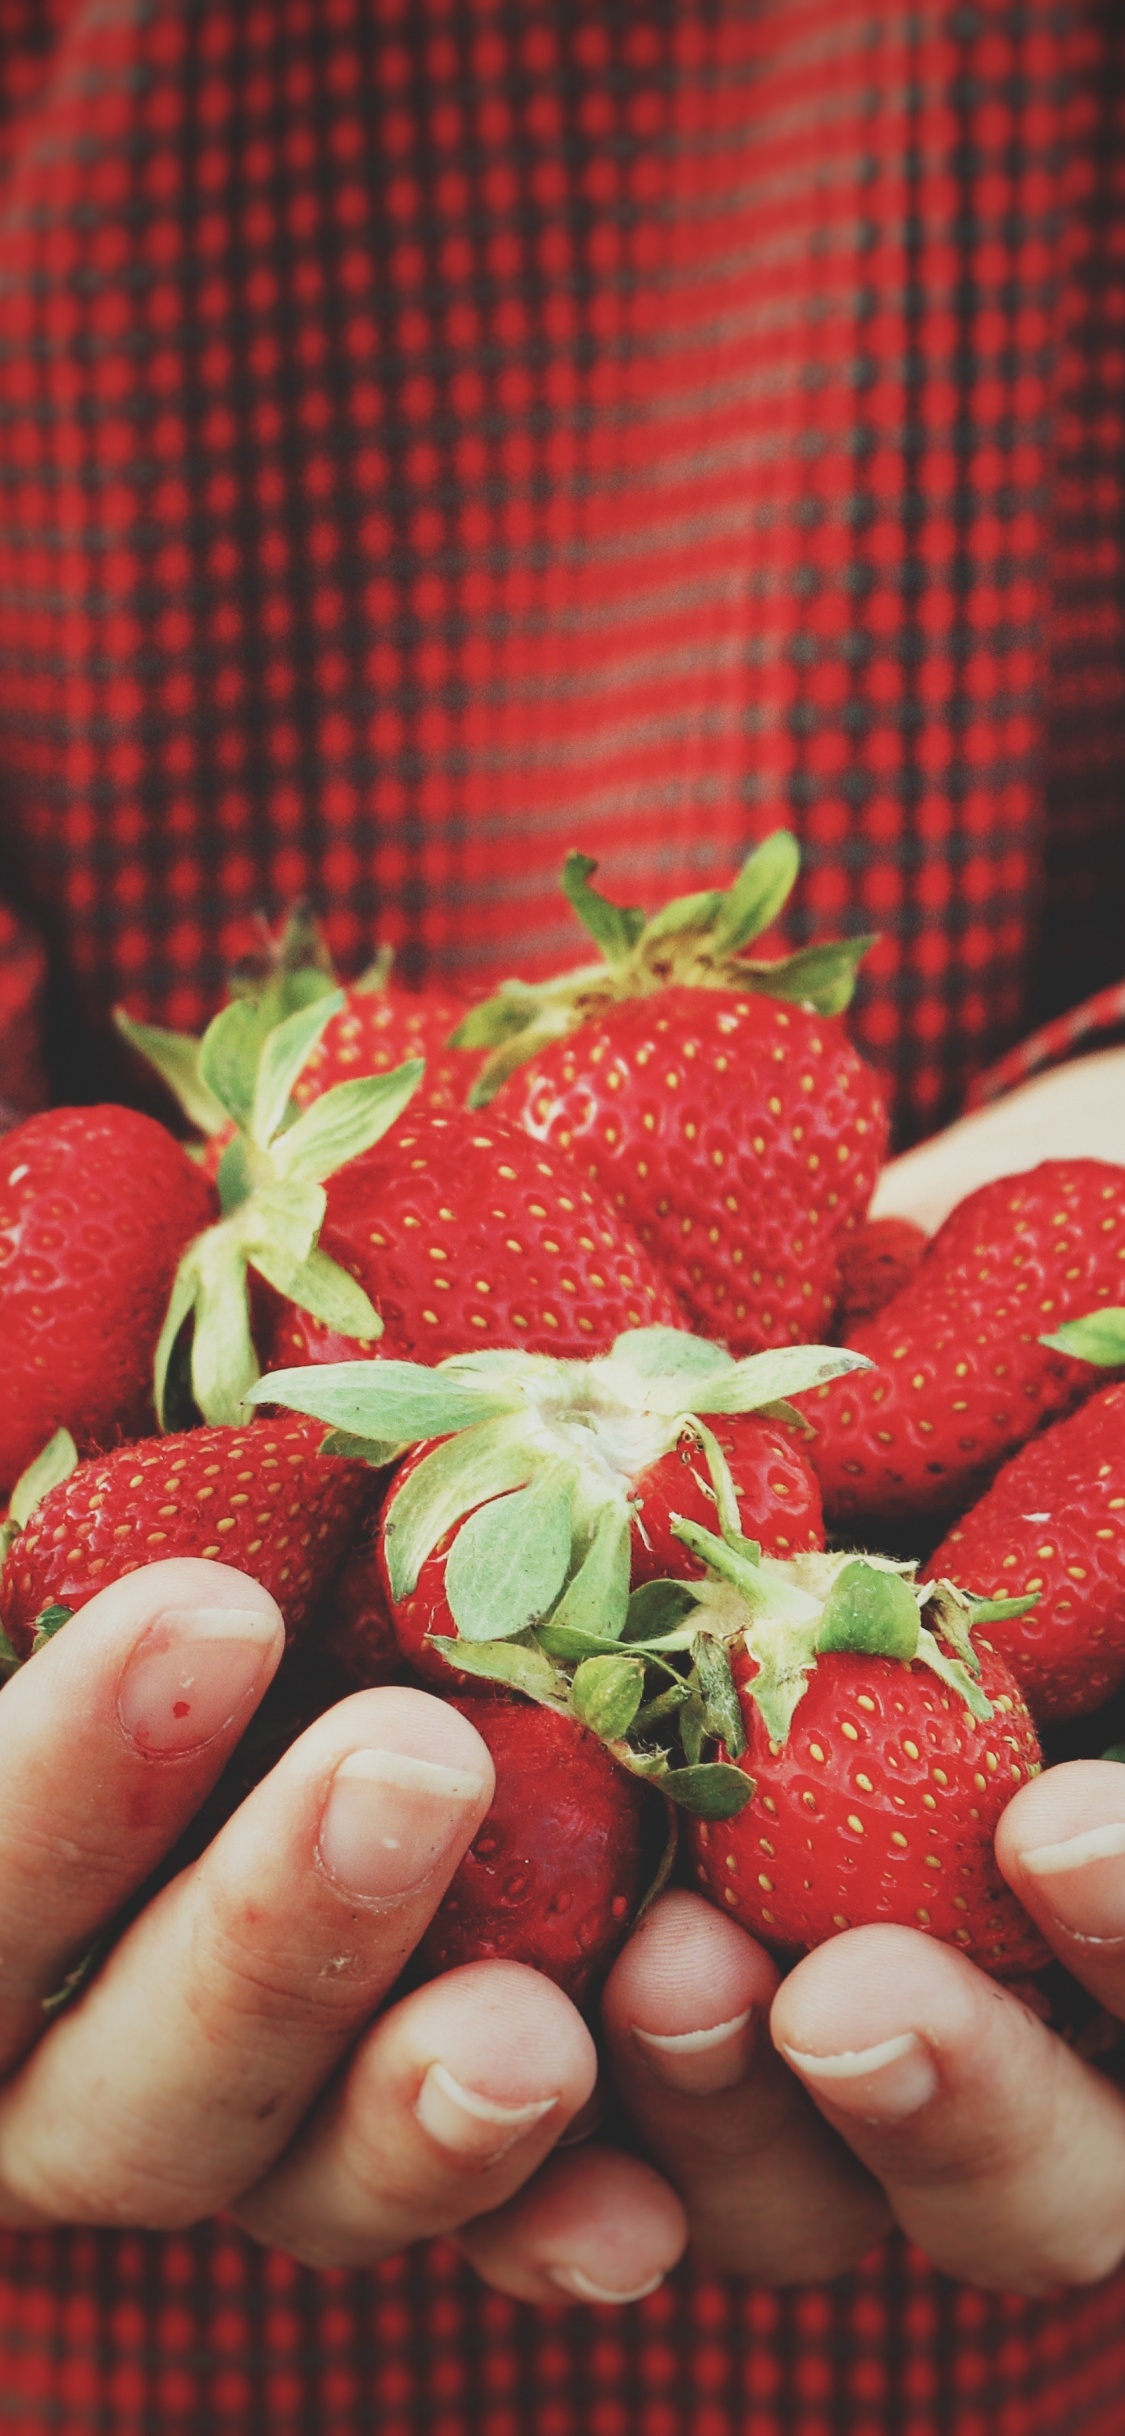 Person Holding Strawberries on Hand. Wallpaper in 1125x2436 Resolution